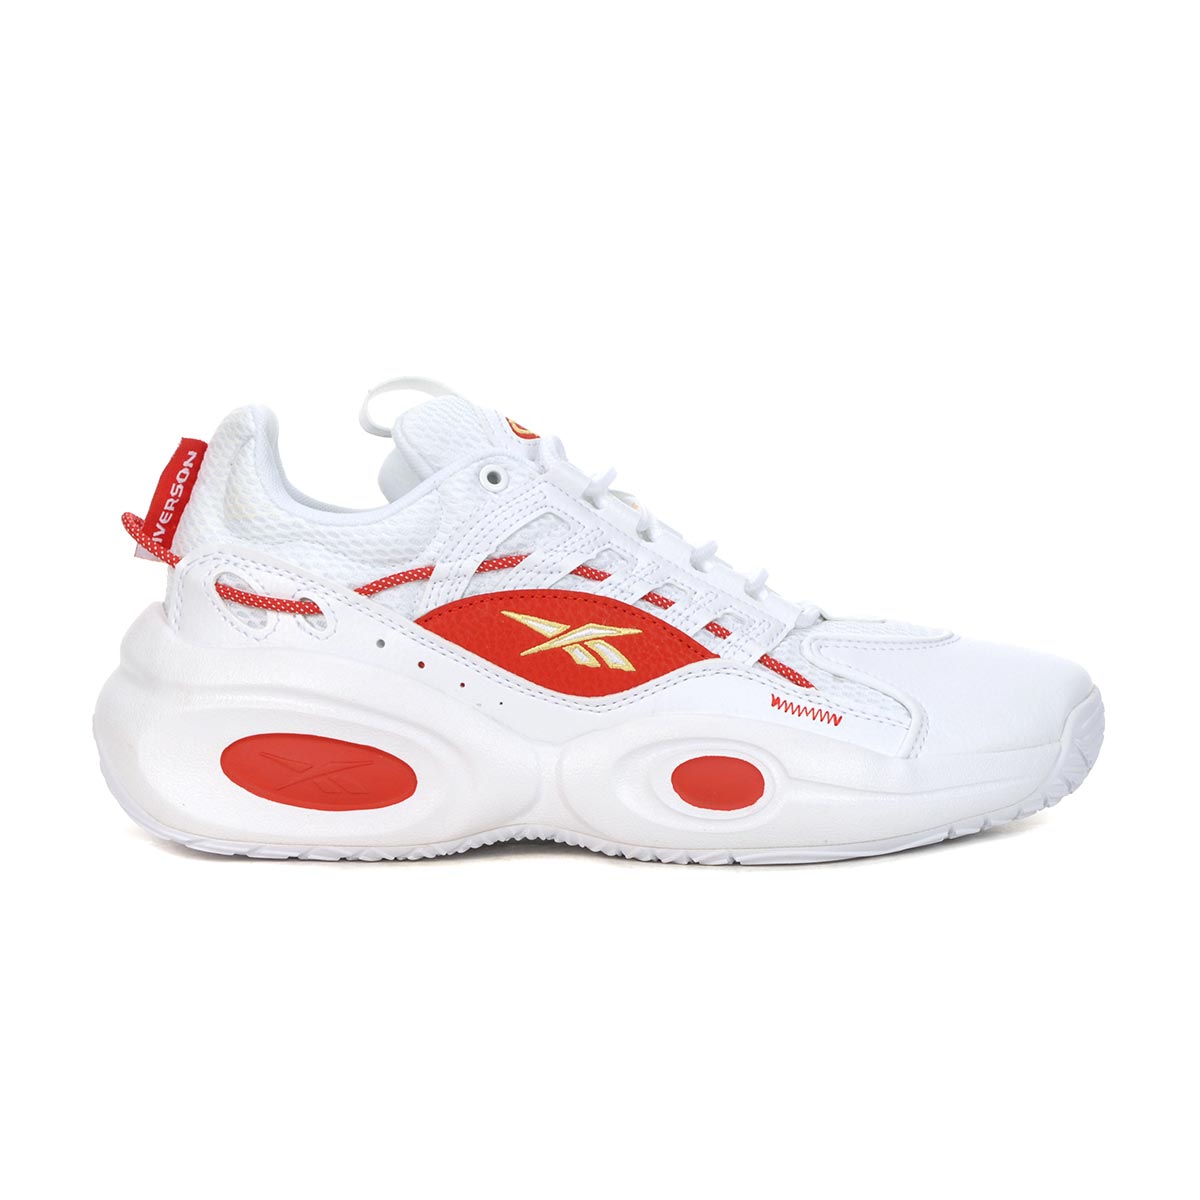 Reebok Men's Solution Mid White/Vector Red Basketball Shoes - WOOKI.COM